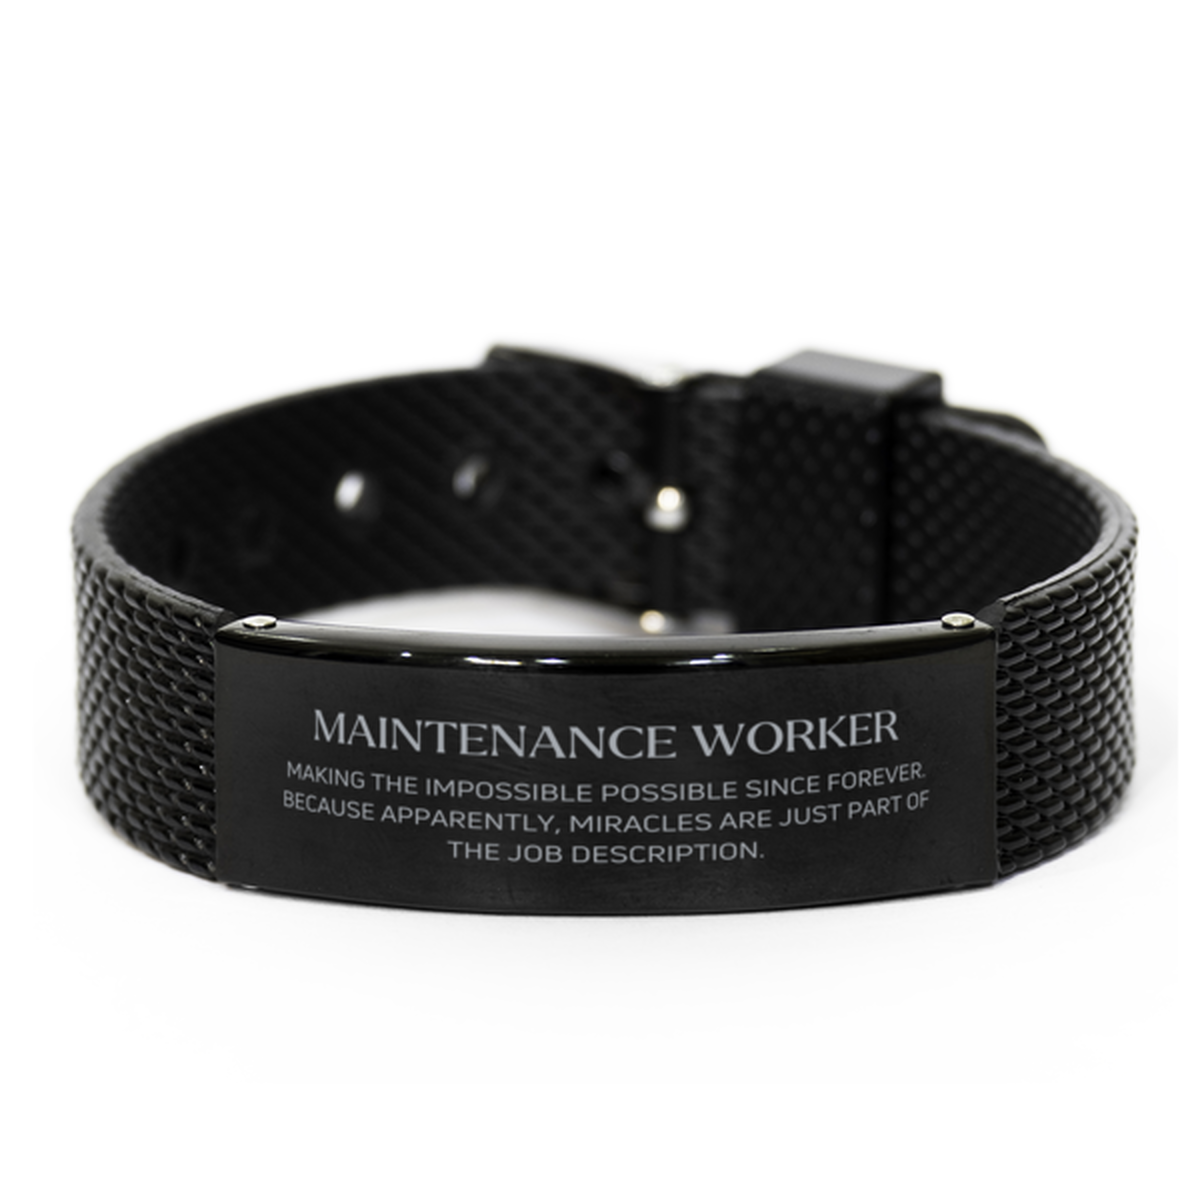 Funny Maintenance Worker Gifts, Miracles are just part of the job description, Inspirational Birthday Black Shark Mesh Bracelet For Maintenance Worker, Men, Women, Coworkers, Friends, Boss